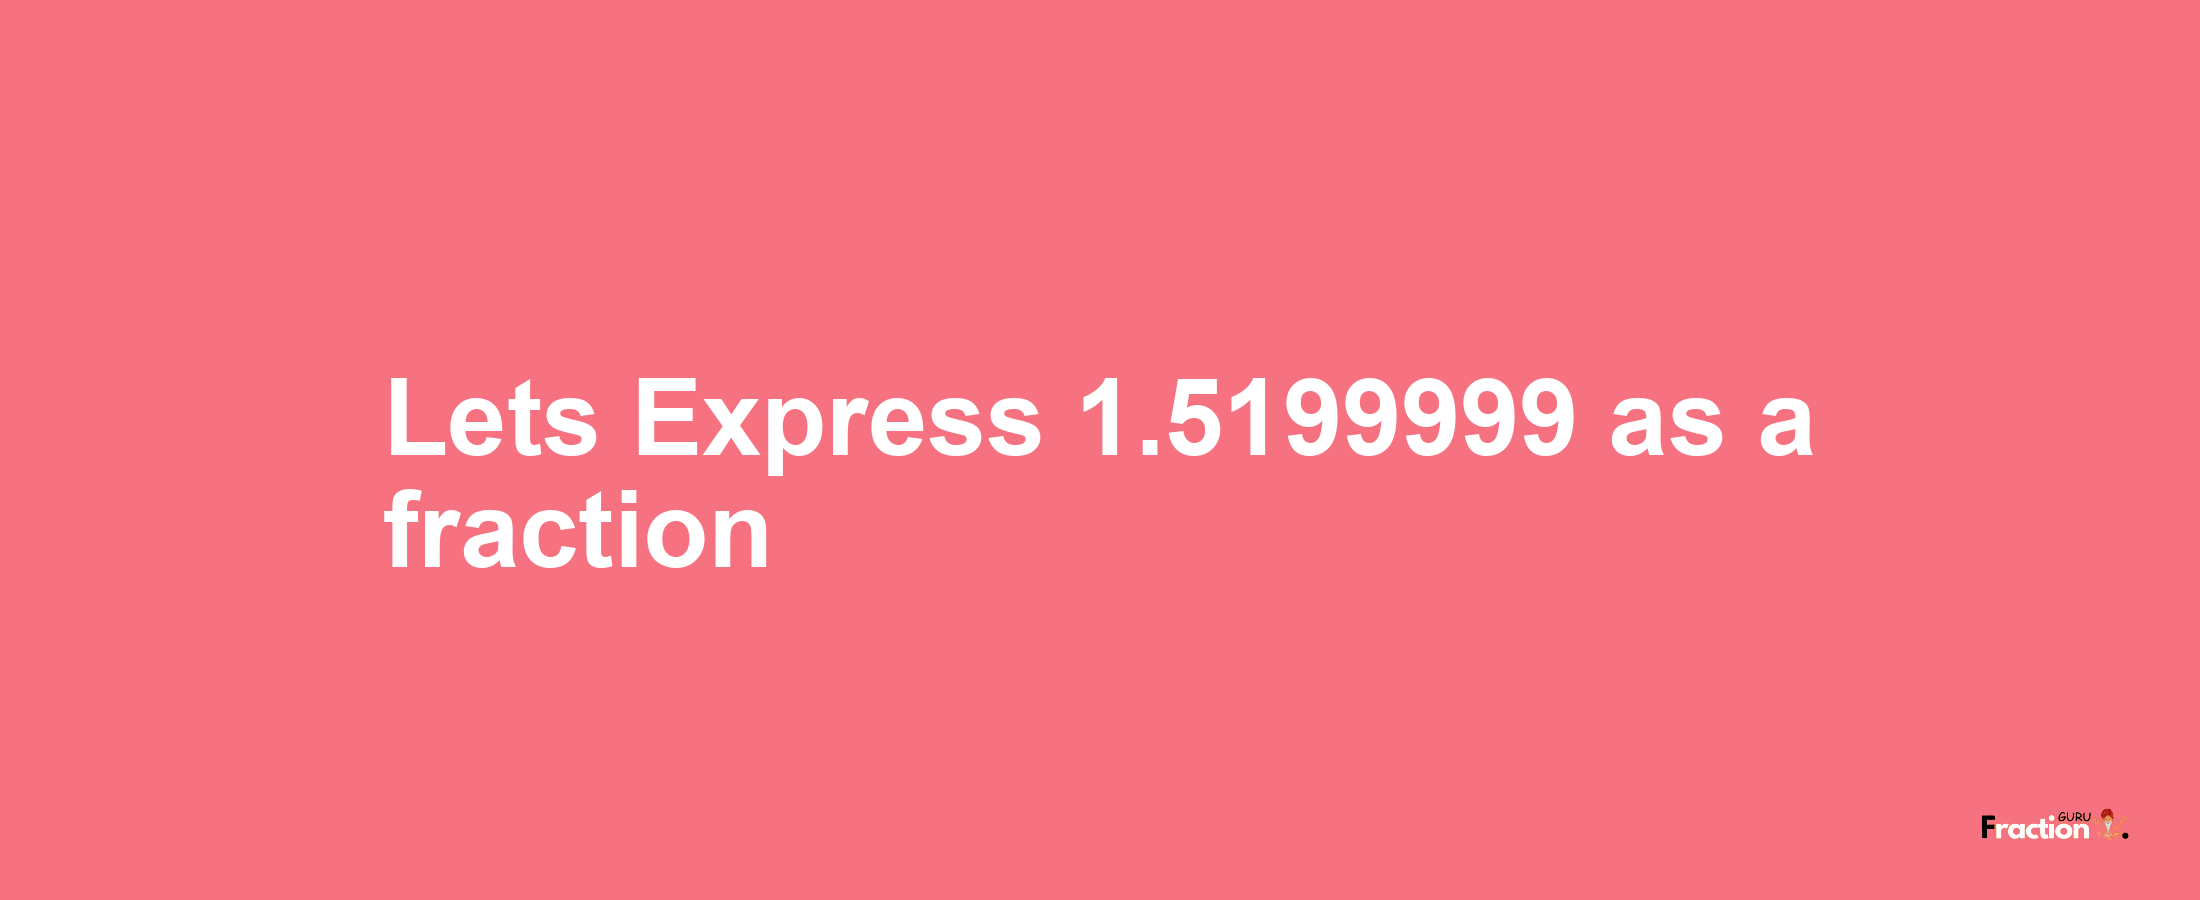 Lets Express 1.5199999 as afraction